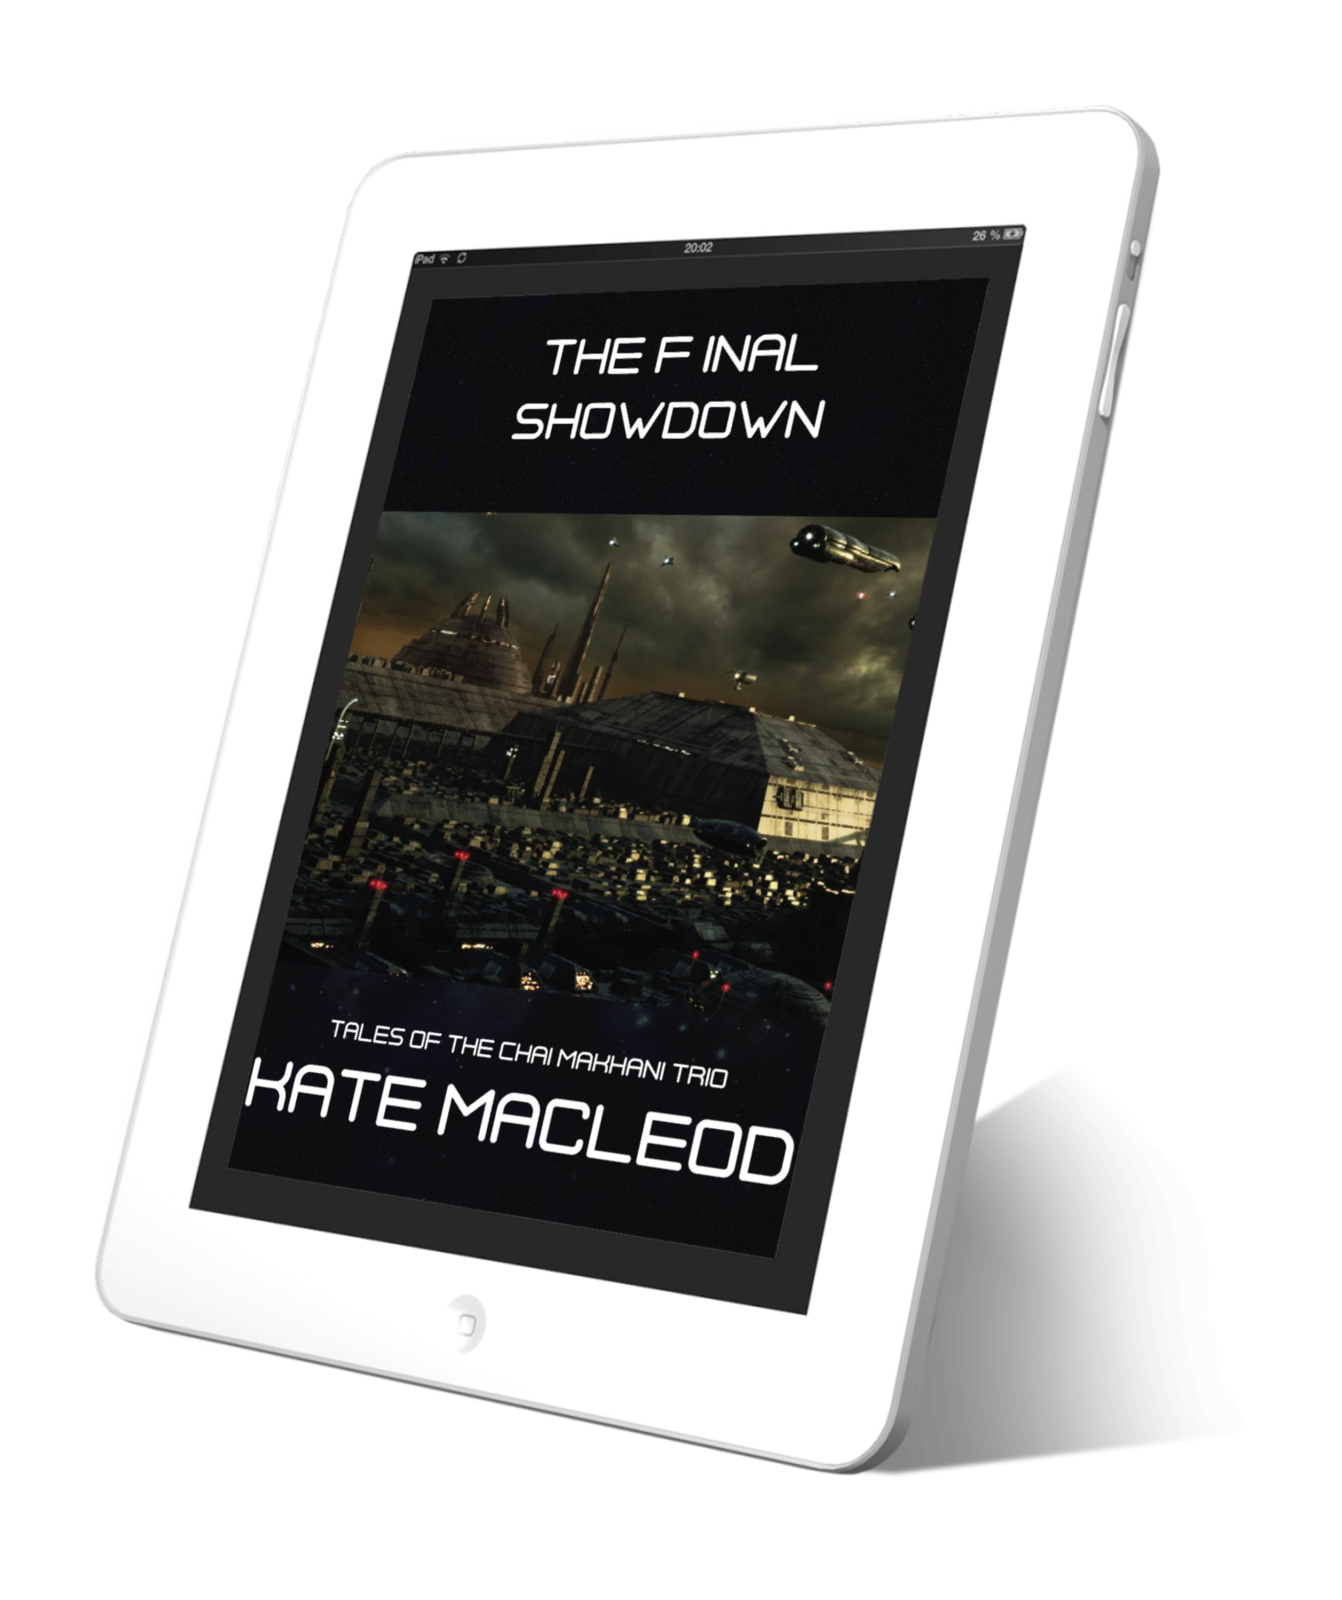 Book cover The Final Showdown: episode 11 of the Tales of the Chai Makhani Trio serialized science fiction short stories.